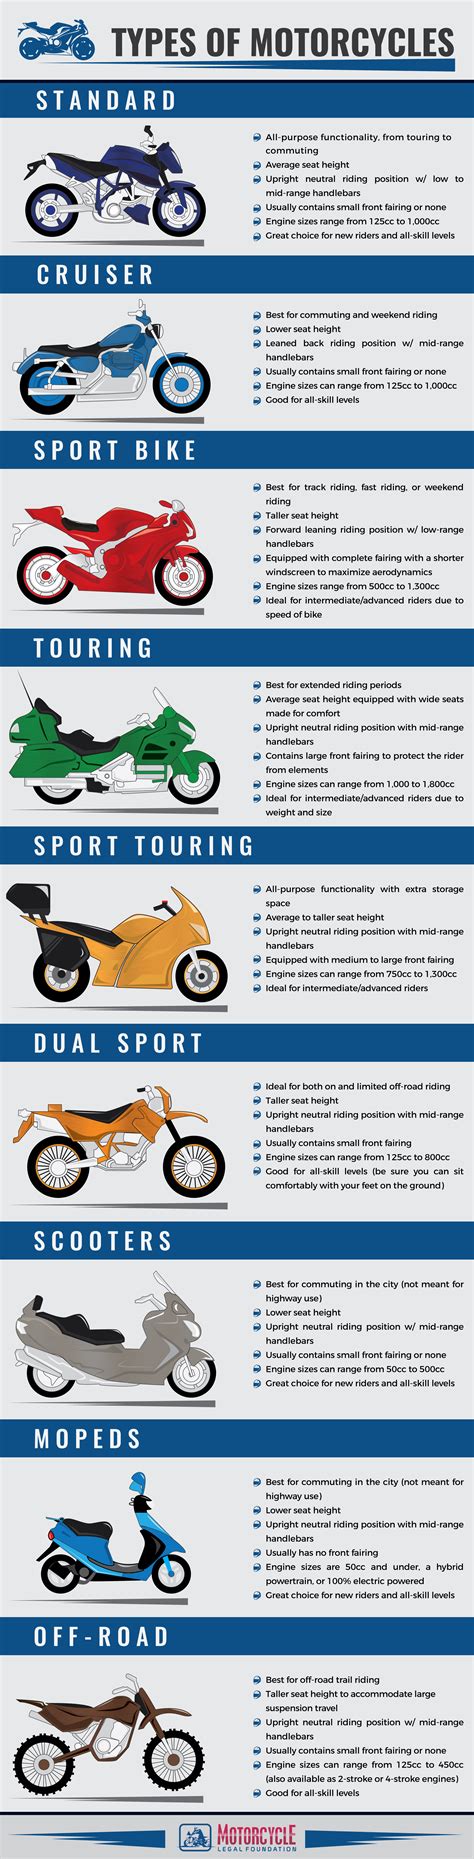 How To Choose The Right Motorcycle For You A Beginner's Guide